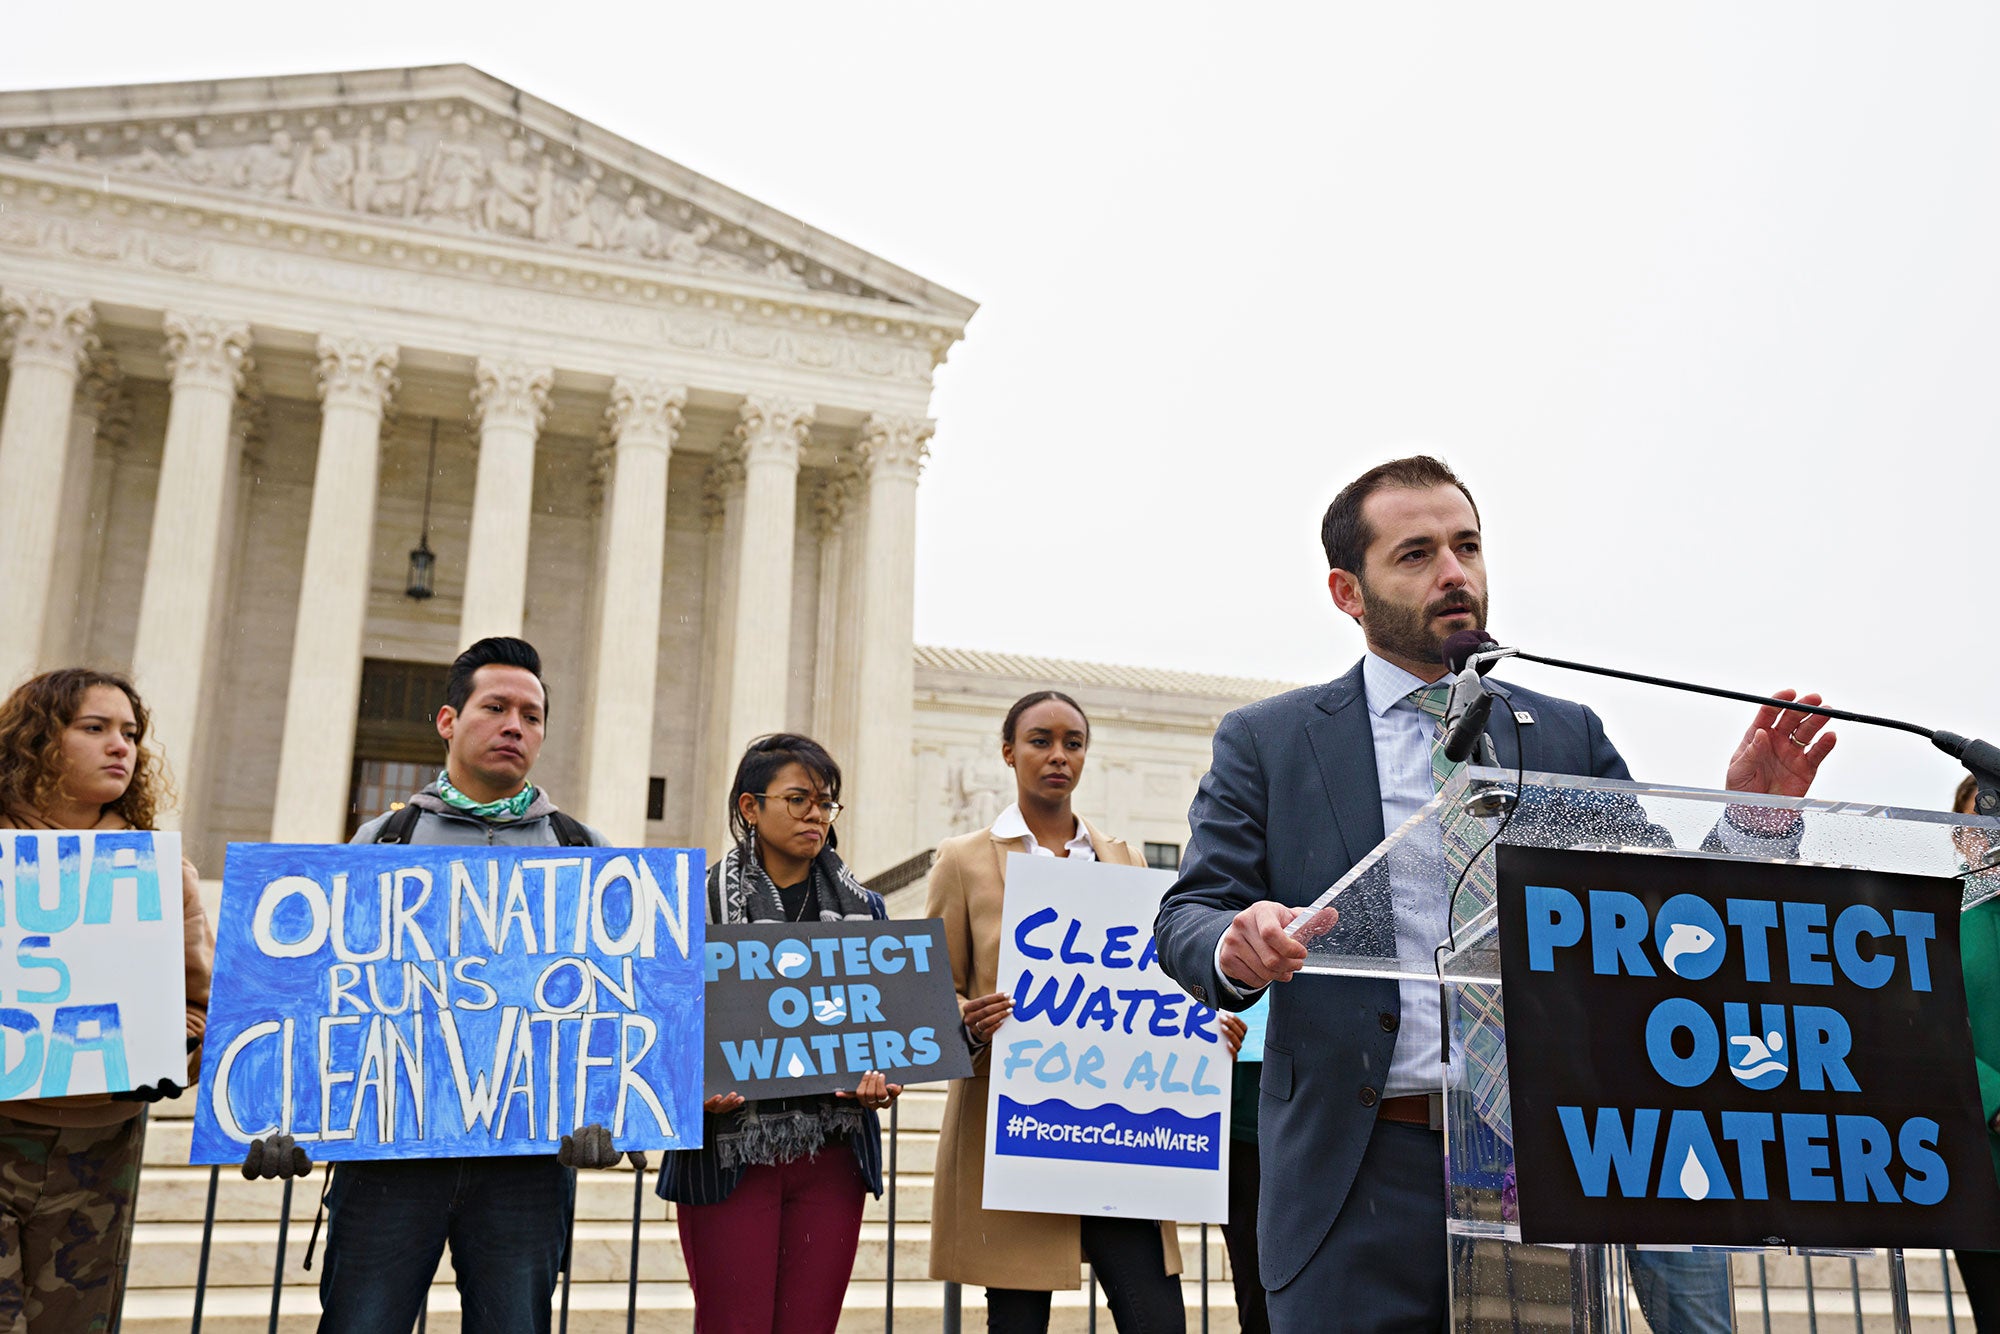 Raul Garcia, Earthjustice’s Vice President of Policy & Legislation, speaks in support of the Clean Water Act outside of the Supreme Court, as the high court heard arguments in the case of Sackett v. EPA, which revolves around which waterways deserve protections under the Clean Water Act.